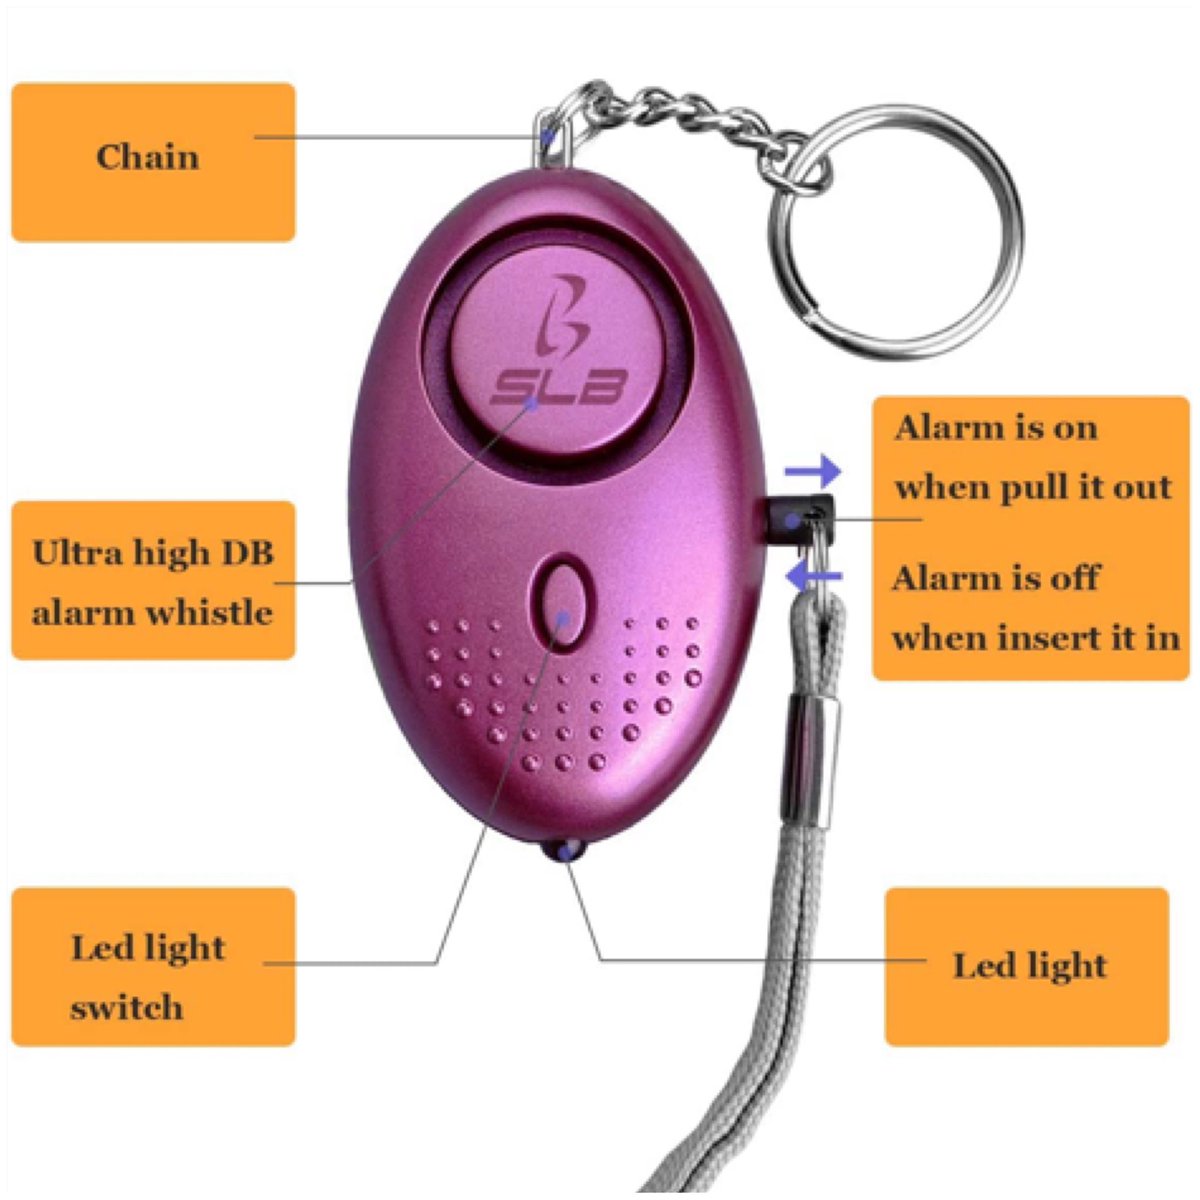 I have been looking into options that could make the women in my life feel safer and I found PERSONAL ALARMS.These alarms are small, carried as a key ring, easy to use, have a torch and are very loud. The aim of this alarm is to alert the public if you’re in danger. >>>